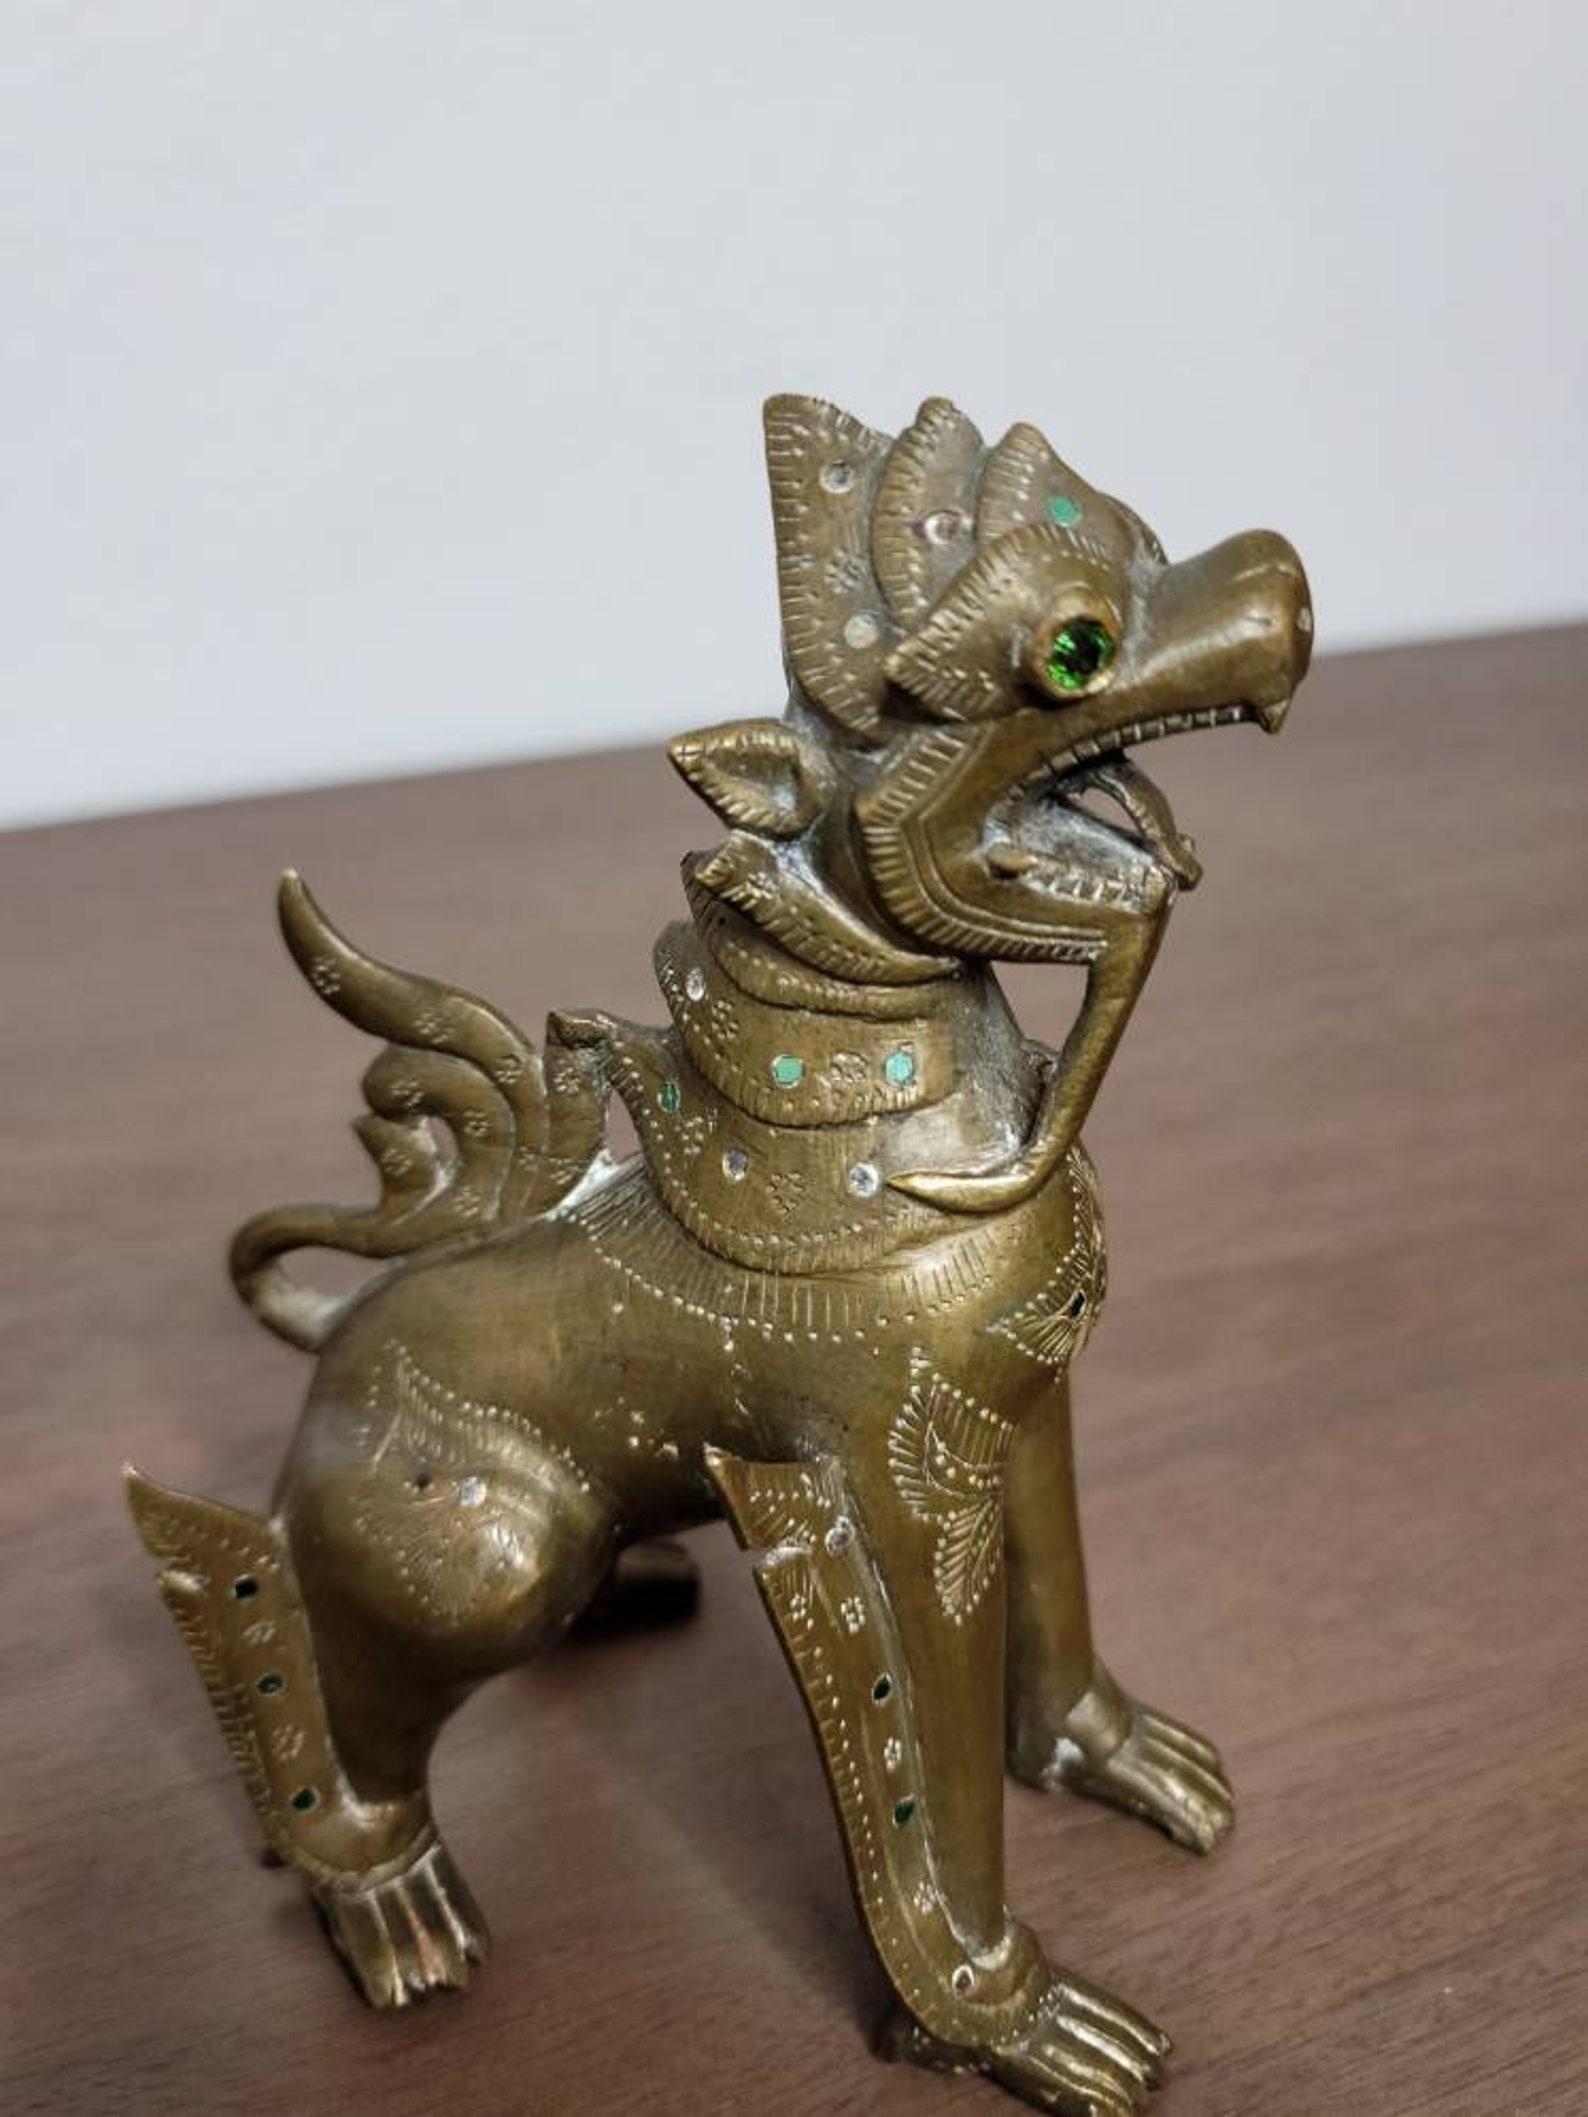 A scarce, high-quality antique Burmese jewel inlaid solid bronze chinthe sculpture. 

Dating to the late 19th century, likely originating in the Mandalay region of central Burma, the fearsome looking beast depicted in traditional Burmese